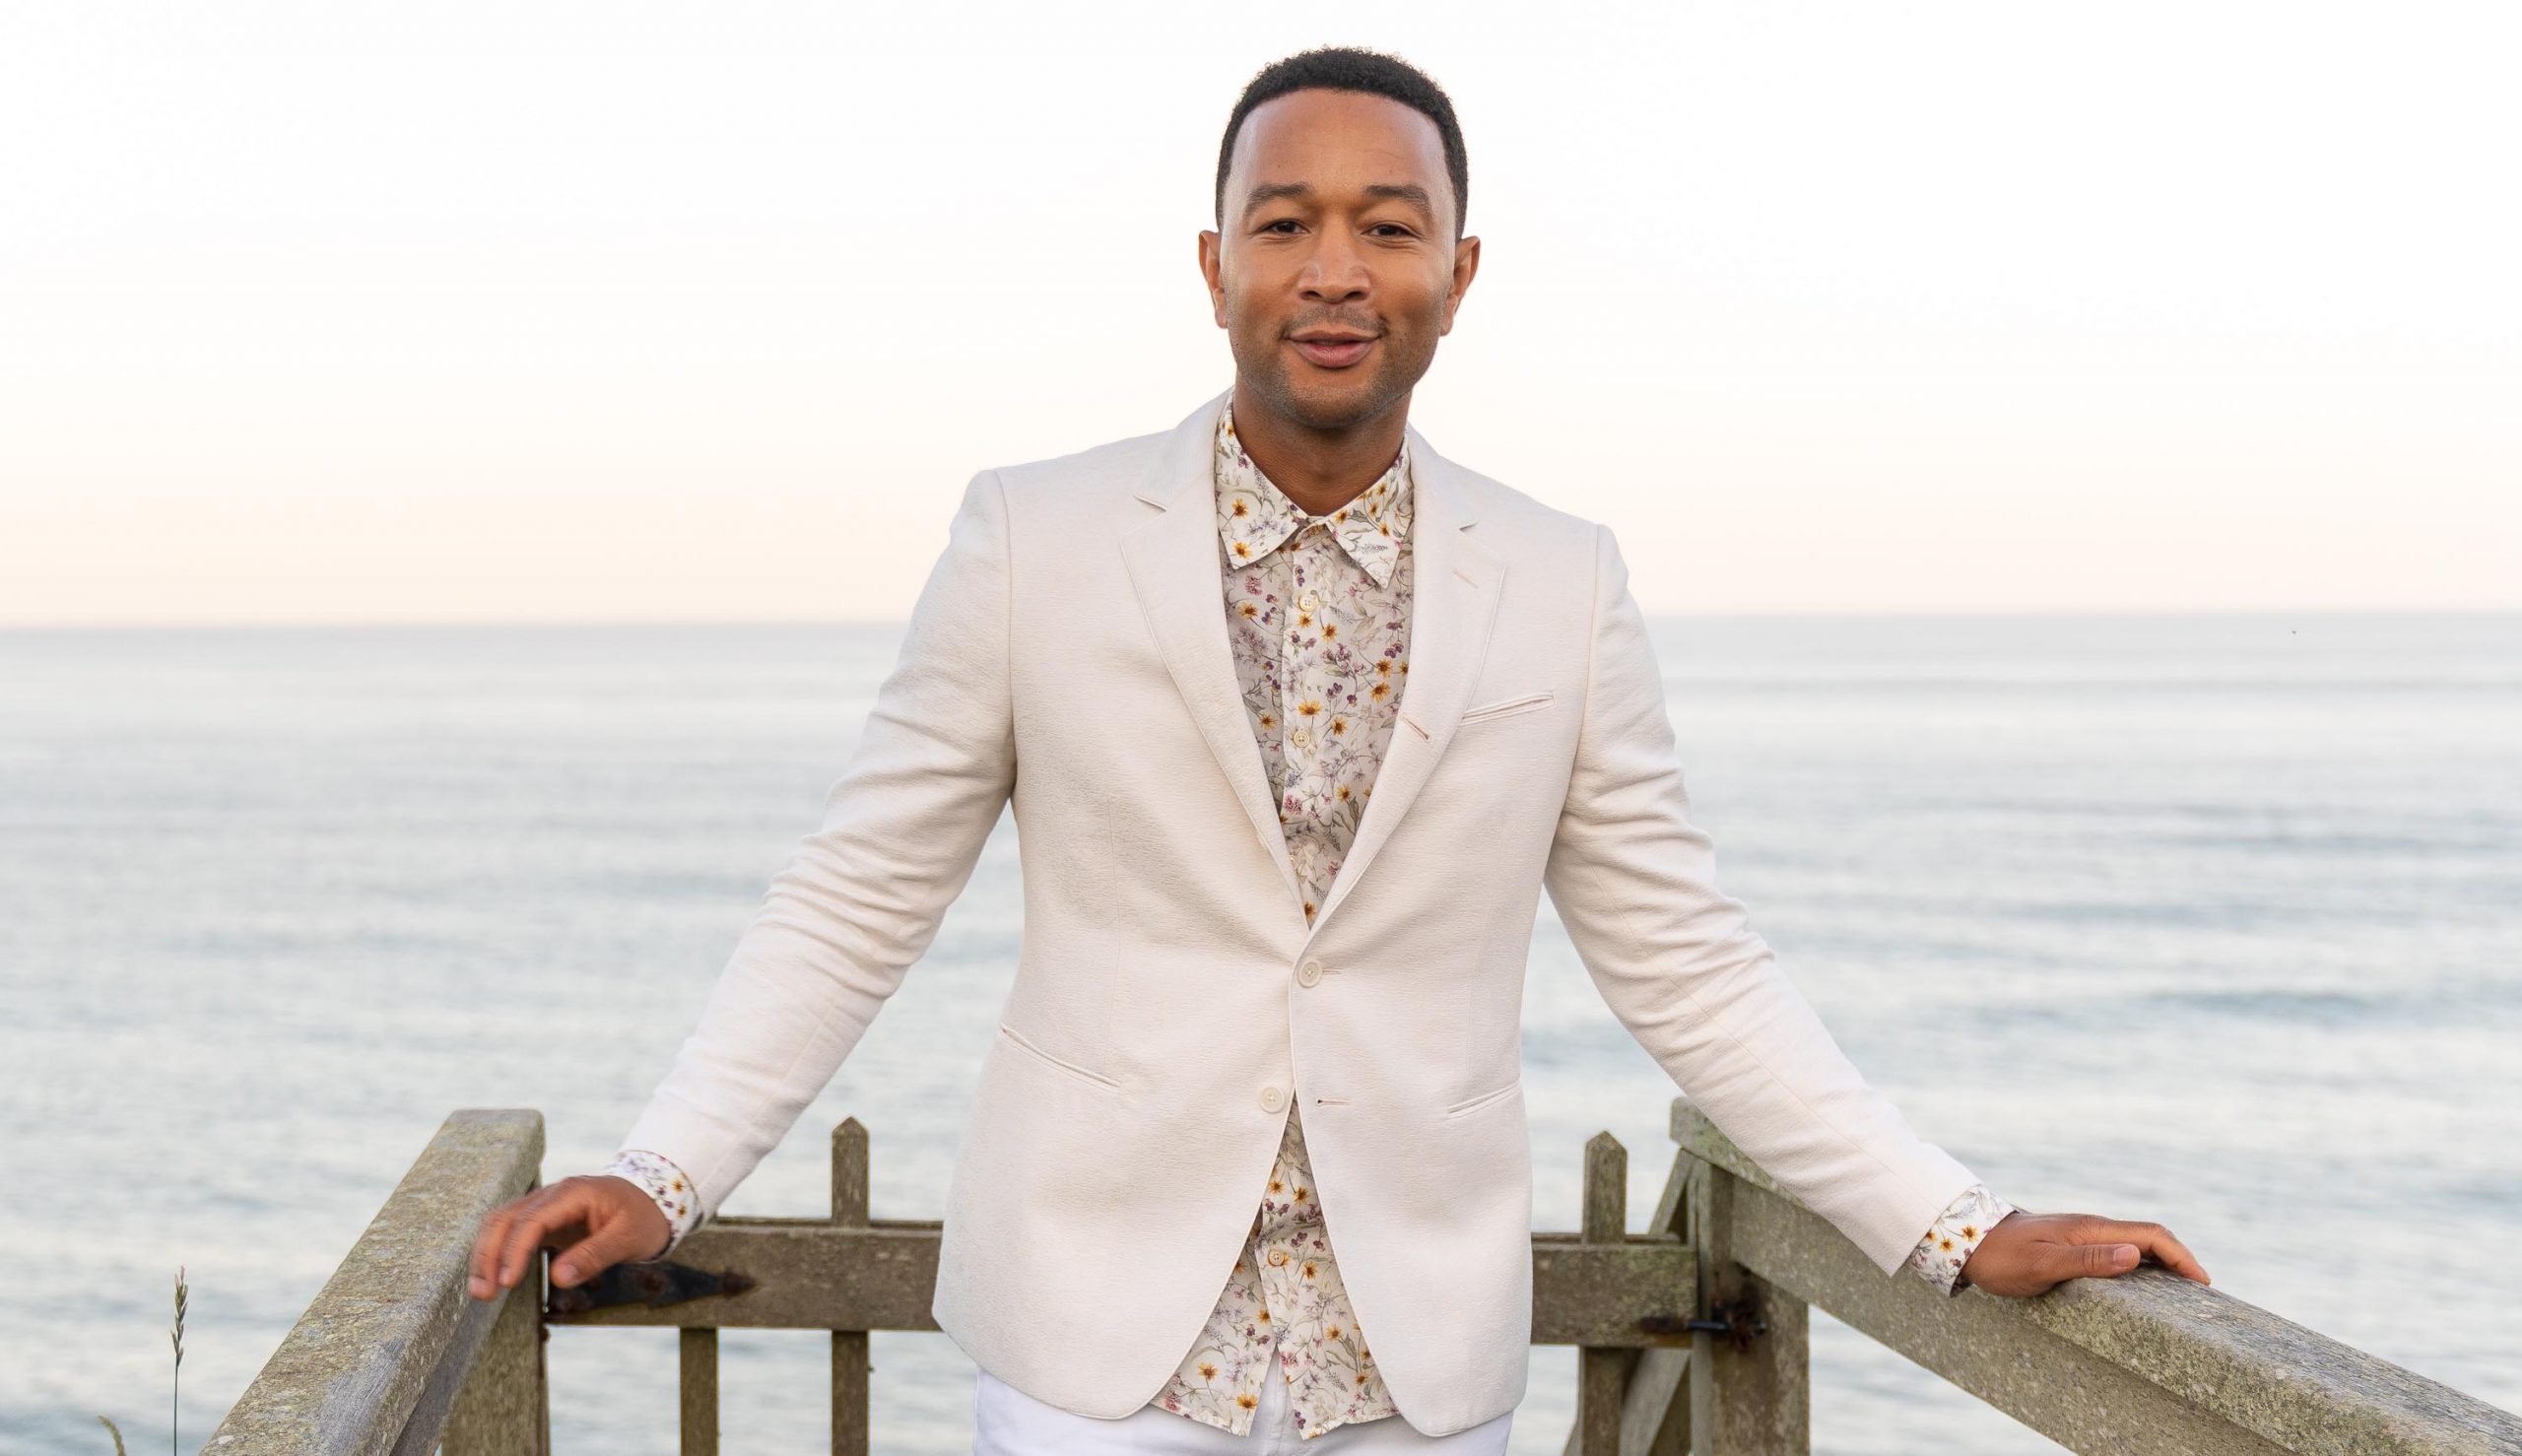 John Legend Photo by Mark Sagliocco/Getty Images for Hamptons Magazine